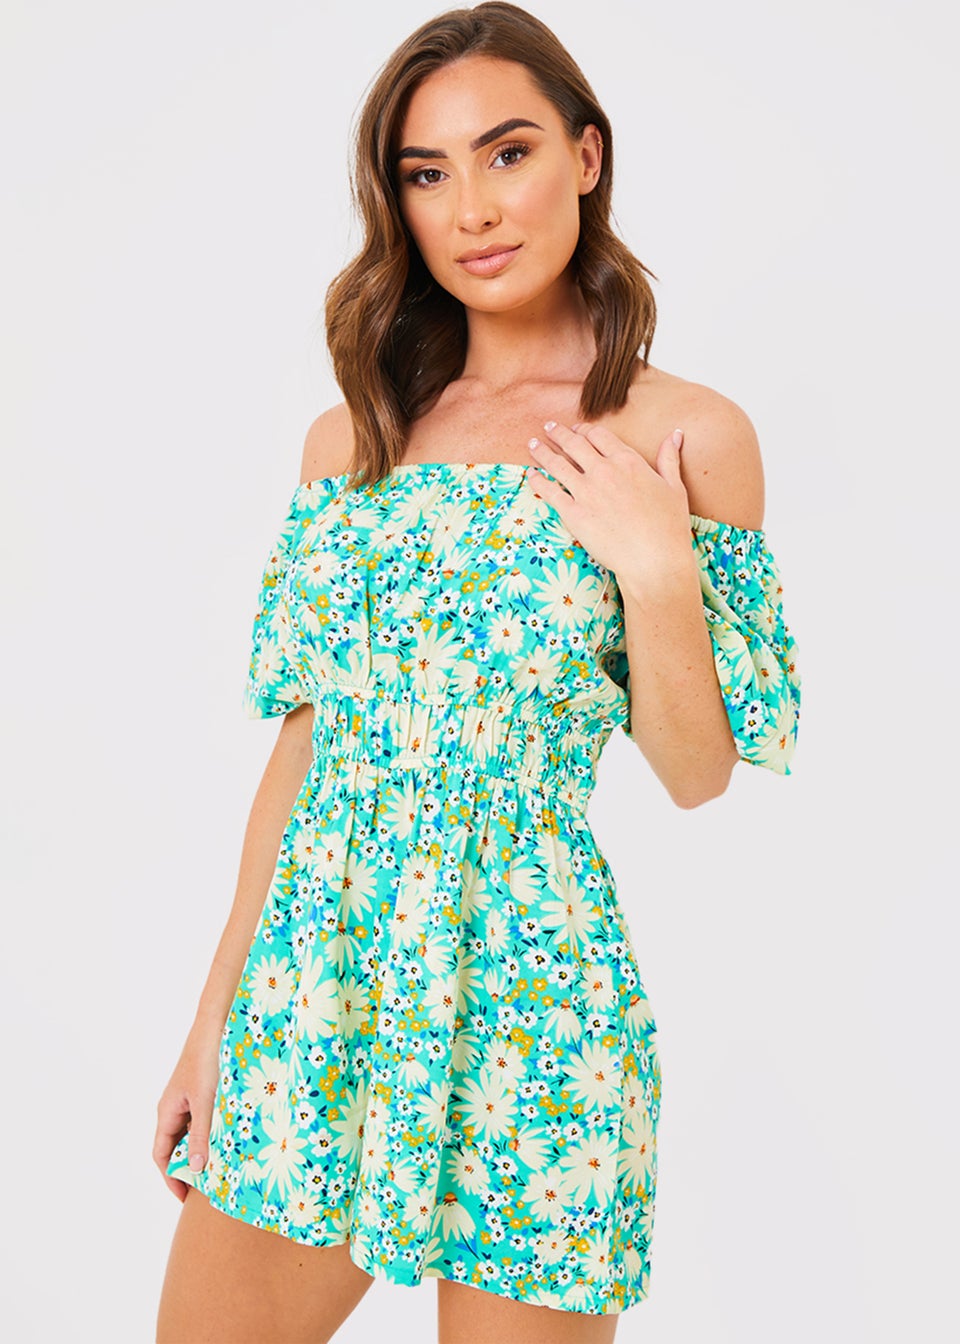 In the Style Jac Jossa Sage Floral Print Playsuit